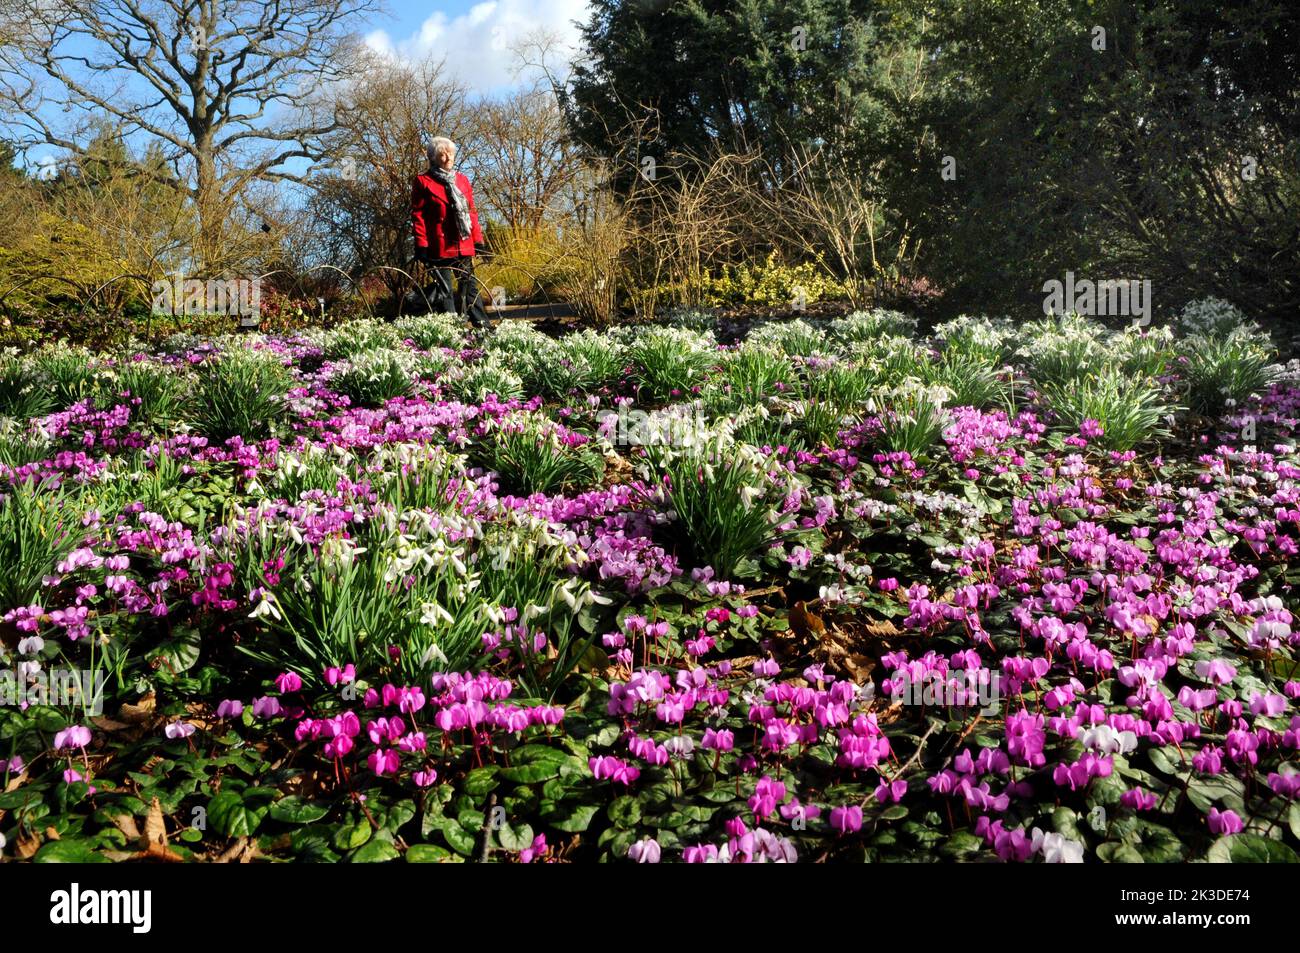 Early  March greets visitors to the winter garden at Hillier Gardens, near Romsey, Hampshire with a magnifcent and clourful display of cyclamen and snowdrops  Pic Mike Walker,2015 Mike Walker Pictures Stock Photo